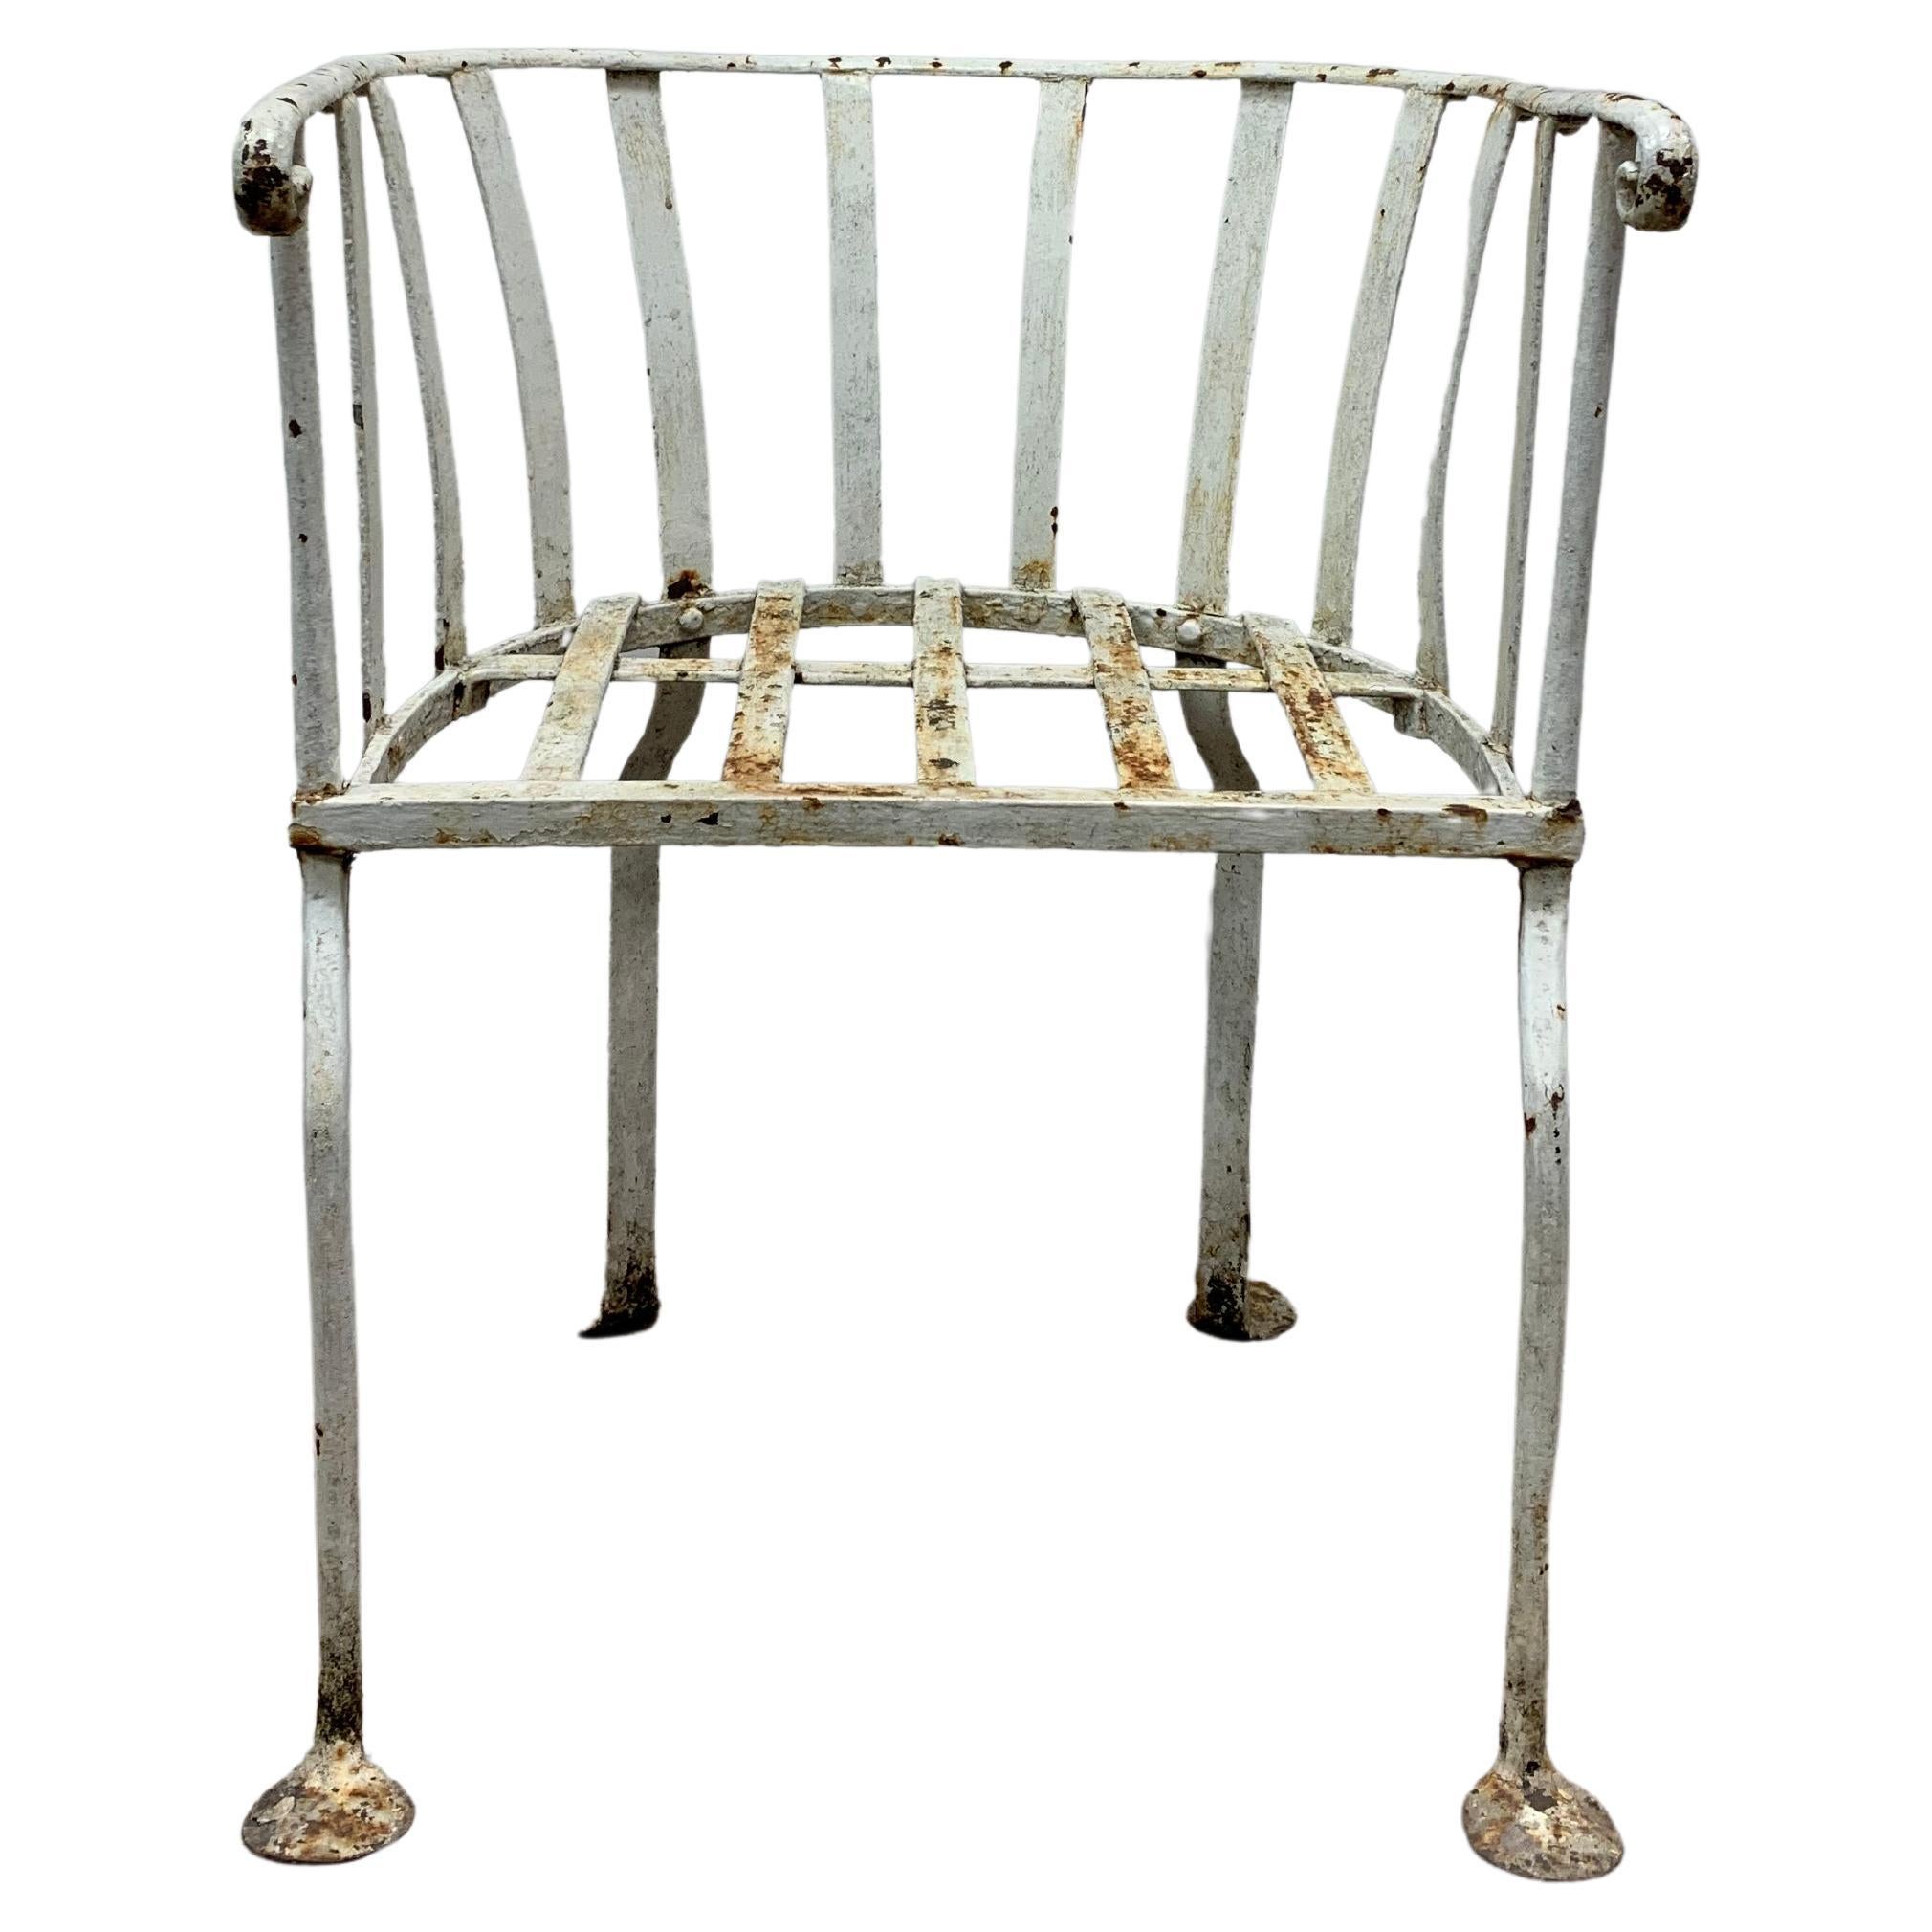 19th Century English Wrought Iron Garden Chair with a Curved Rounded Back For Sale